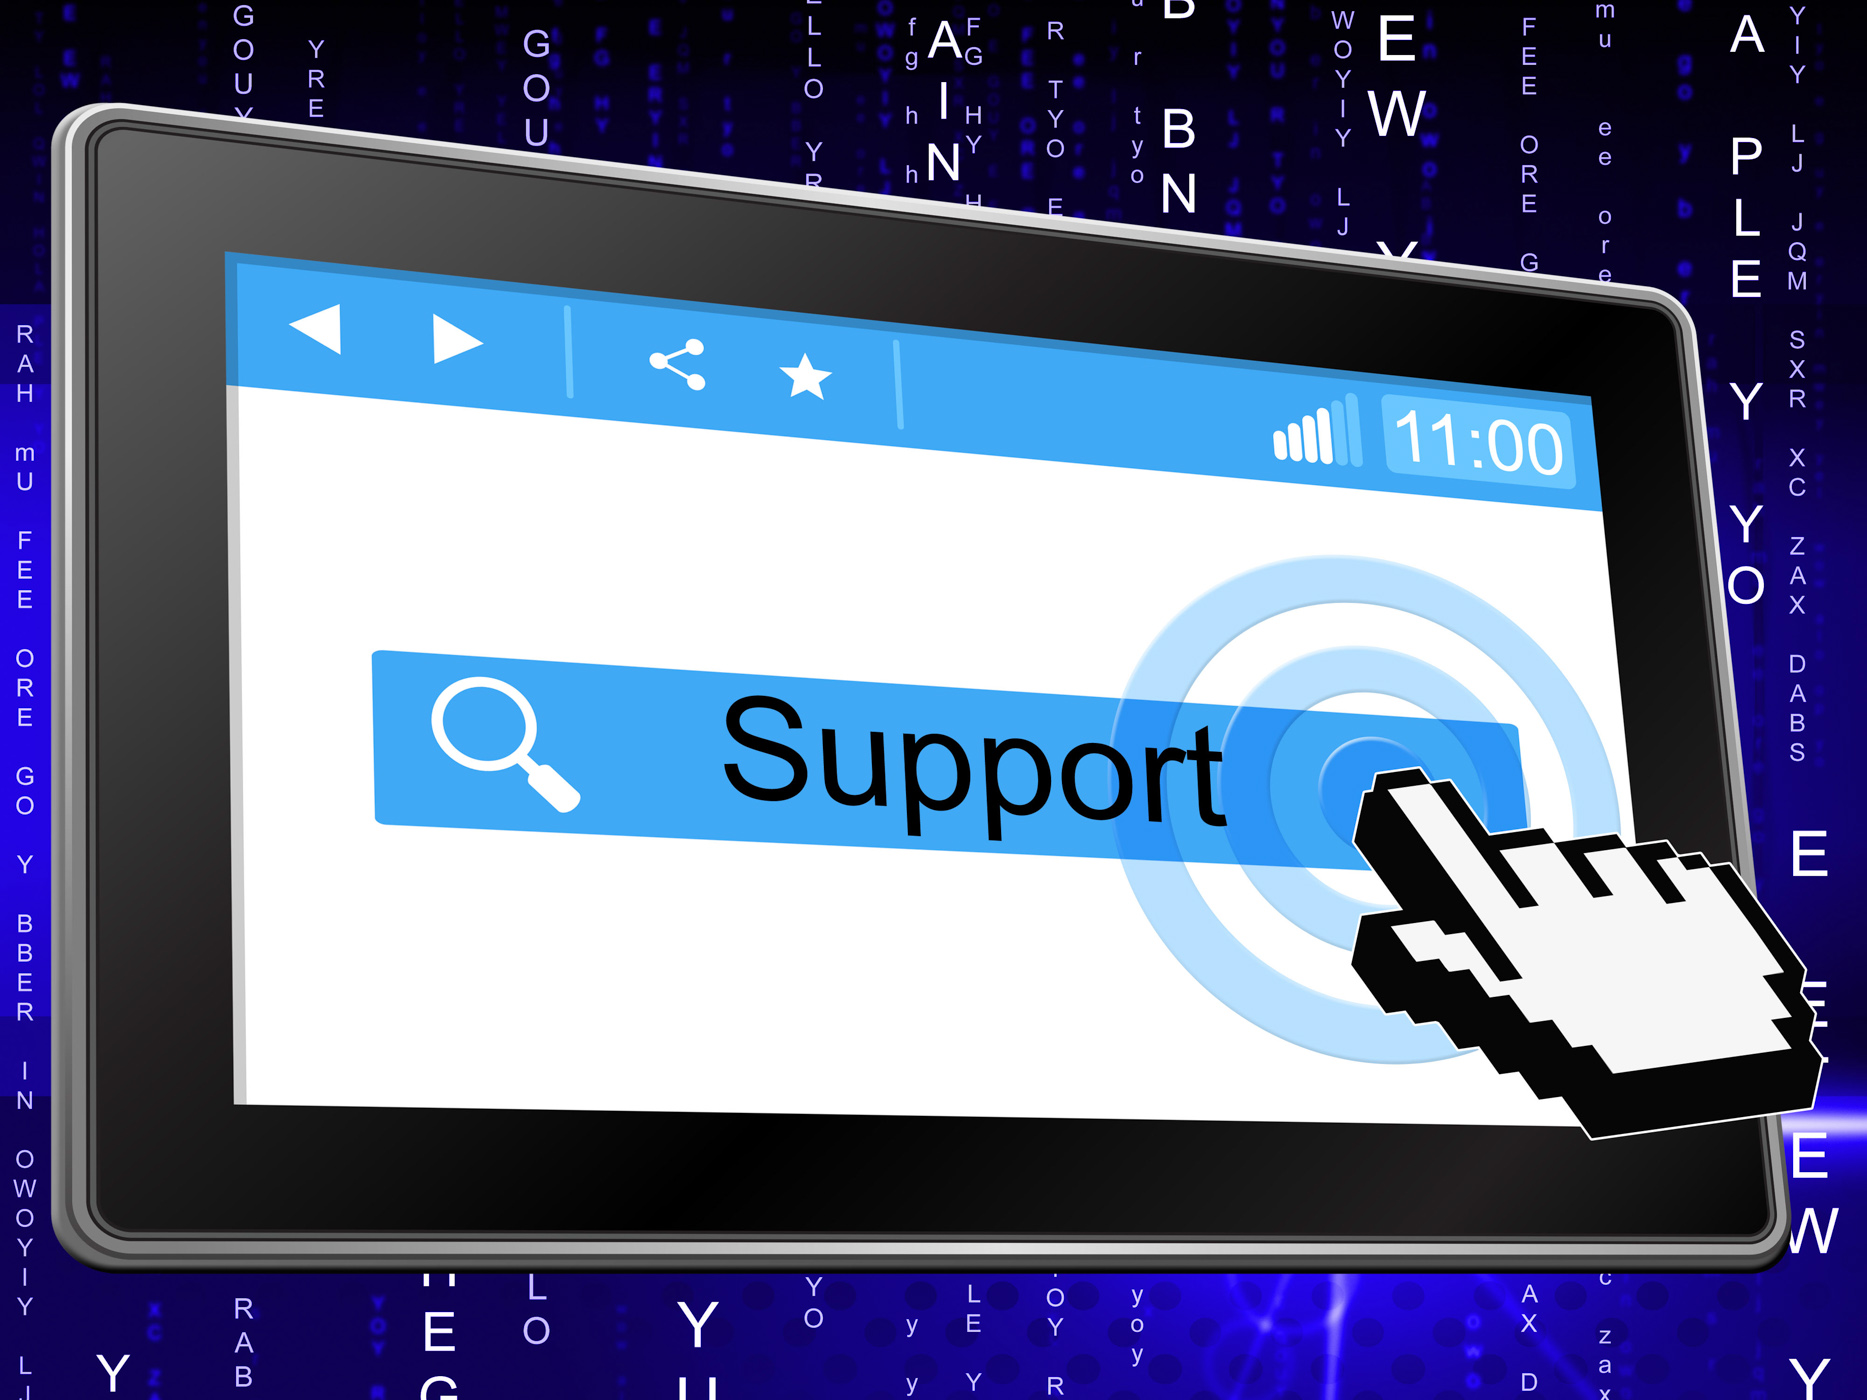 Online support indicates world wide web and advice photo